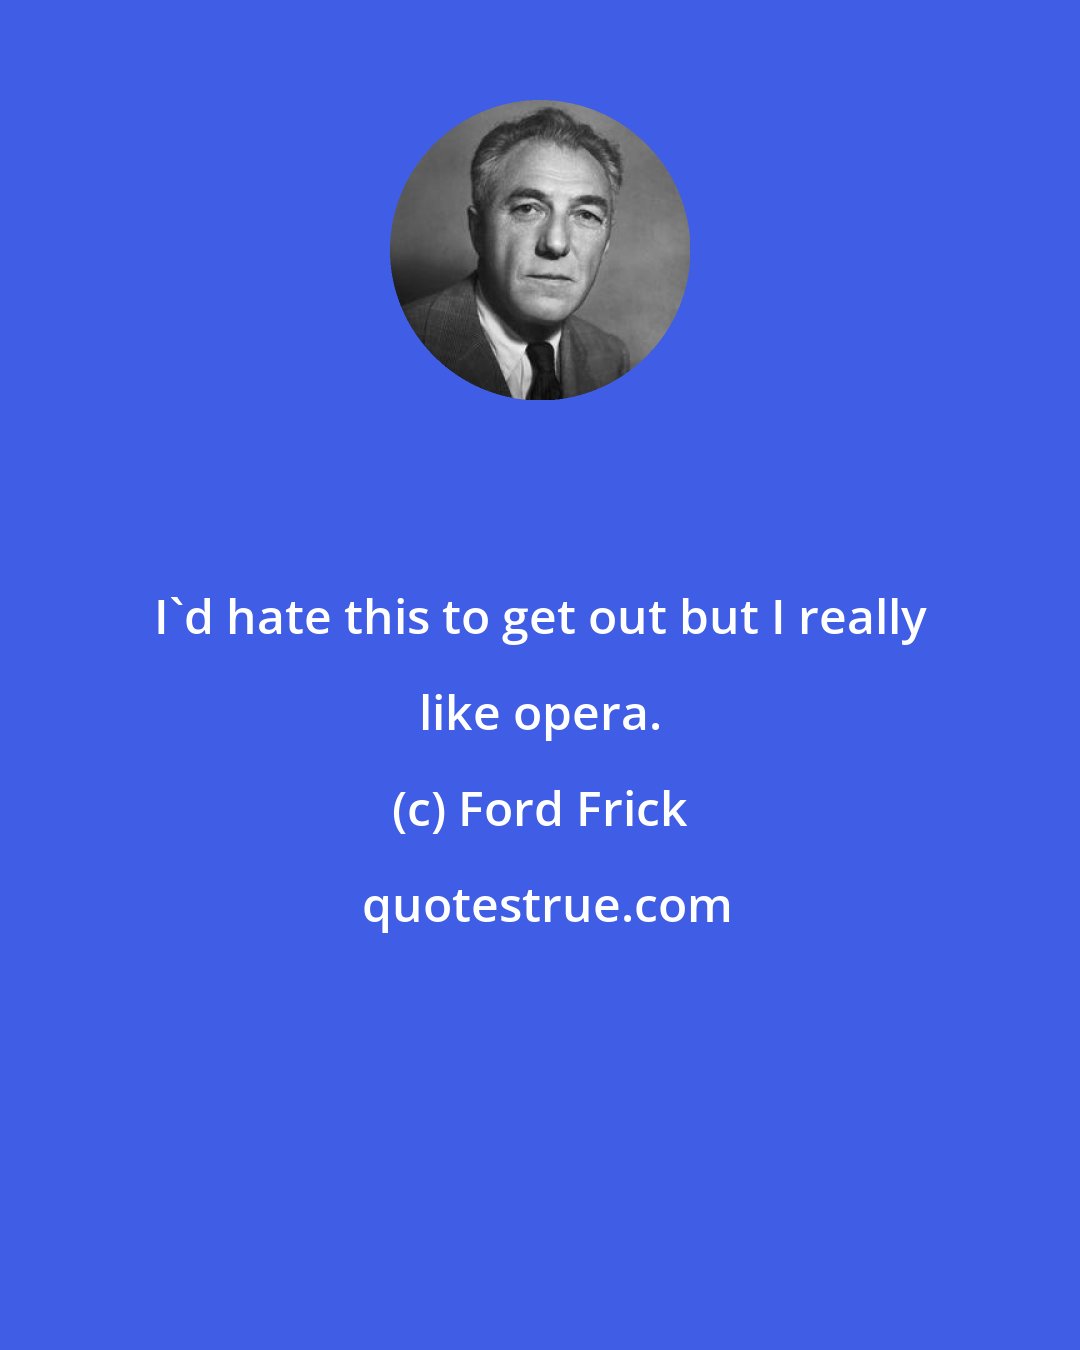 Ford Frick: I'd hate this to get out but I really like opera.